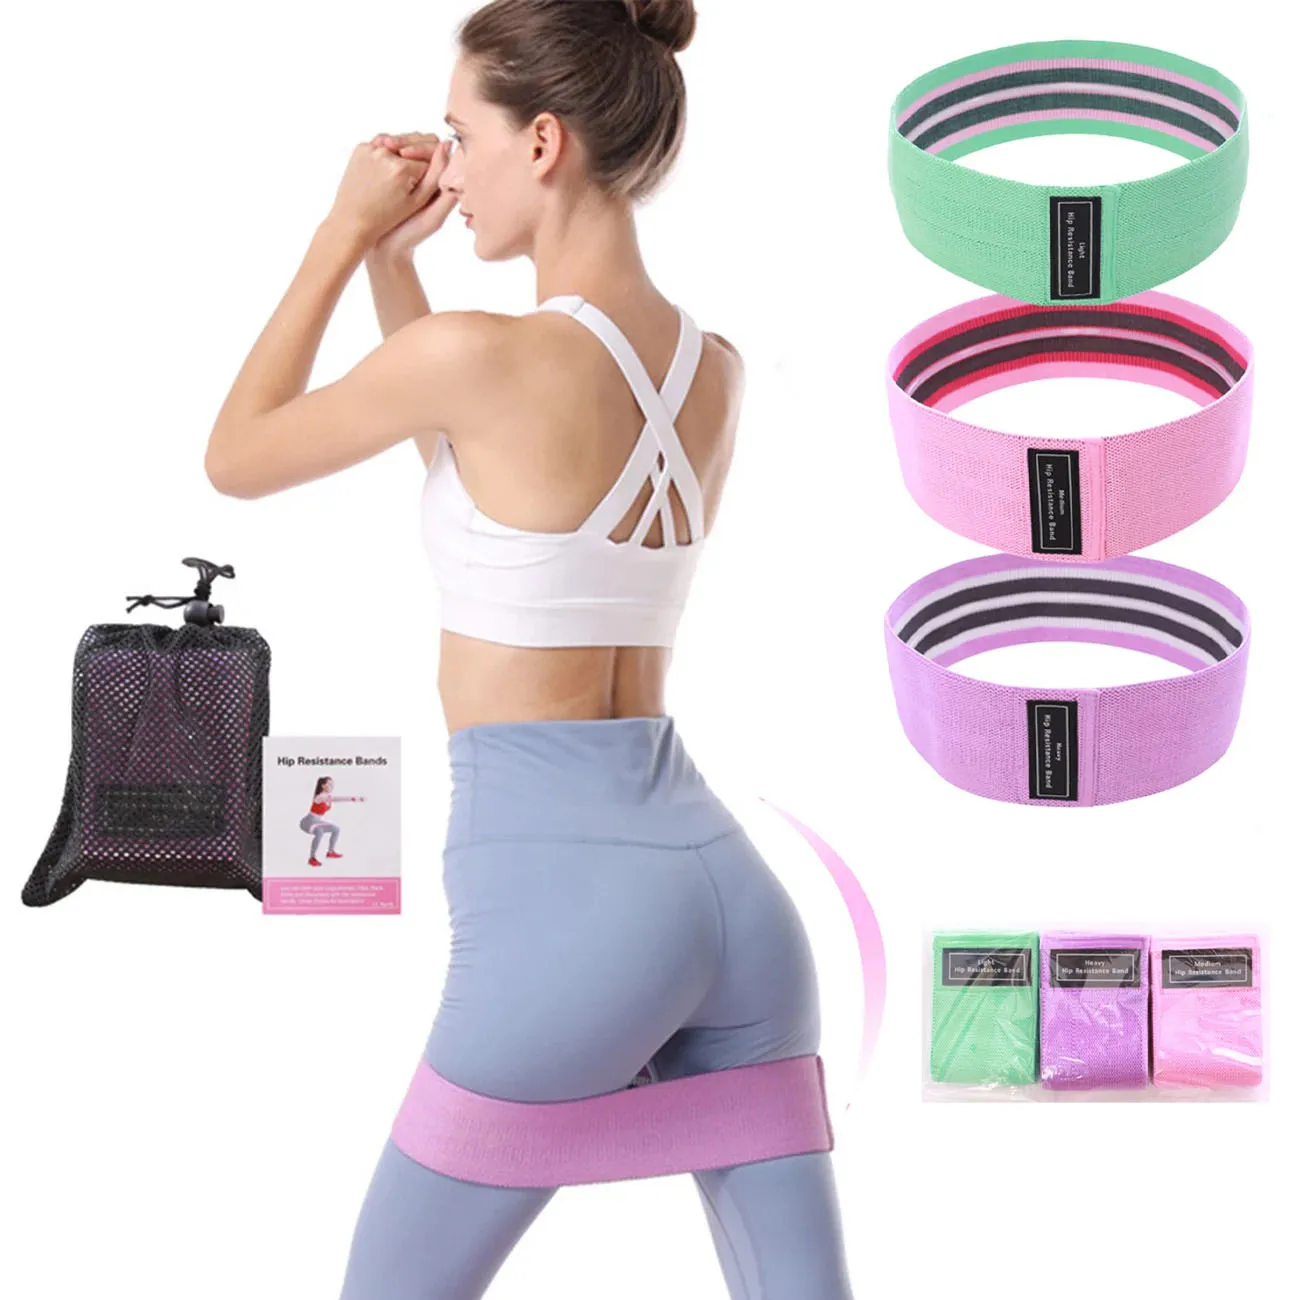 

1Set Resistance Bands Non-Slip Fitness Boody Build Rubber Expander Elastic Band For Home Gym Workout Buttock Leg Muscle Exercise